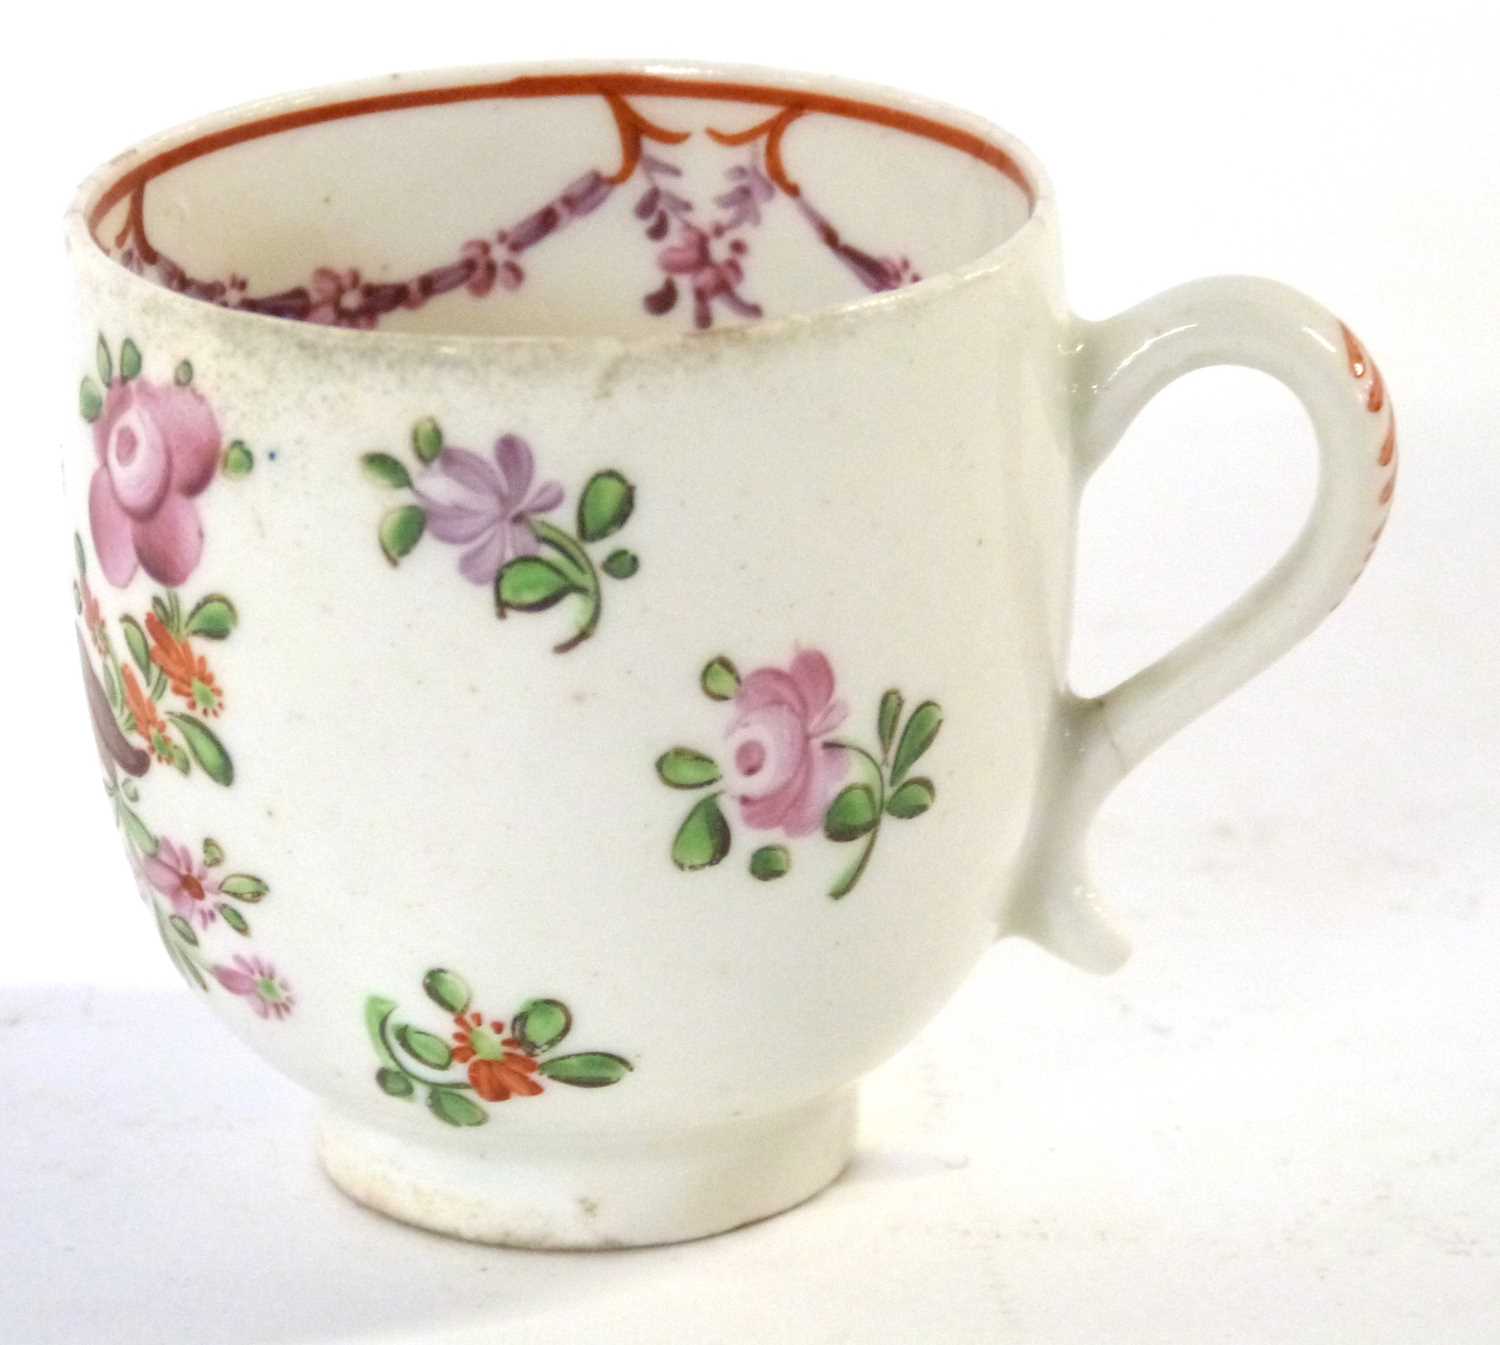 An 18th Century Lowestoft porcelain coffee cup with a polychrome Curtis style design